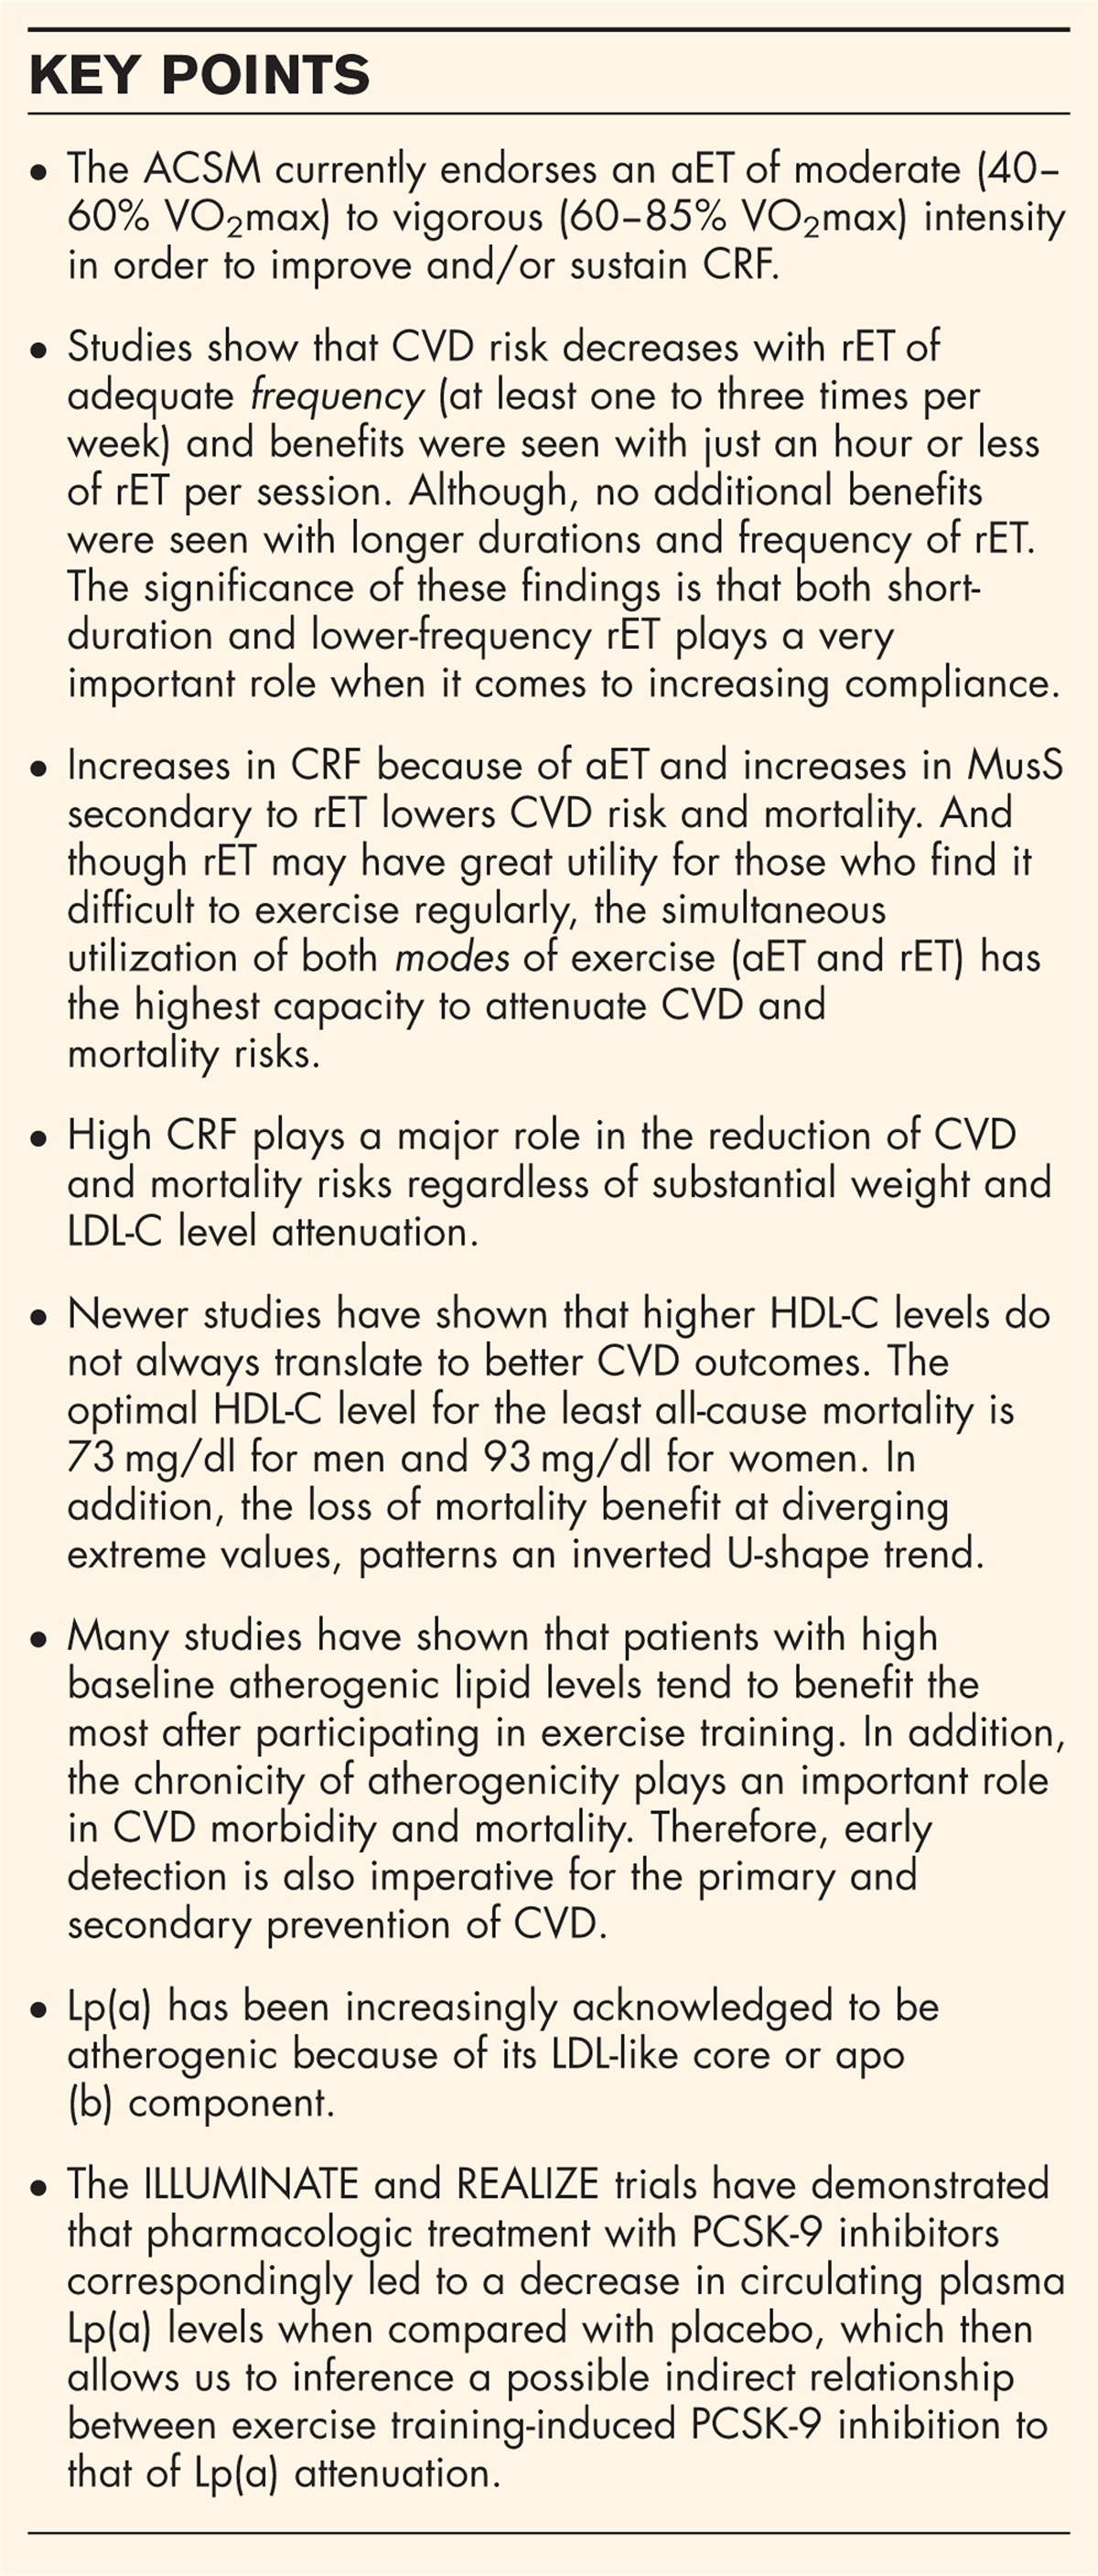 Clinical associations between exercise and lipoproteins